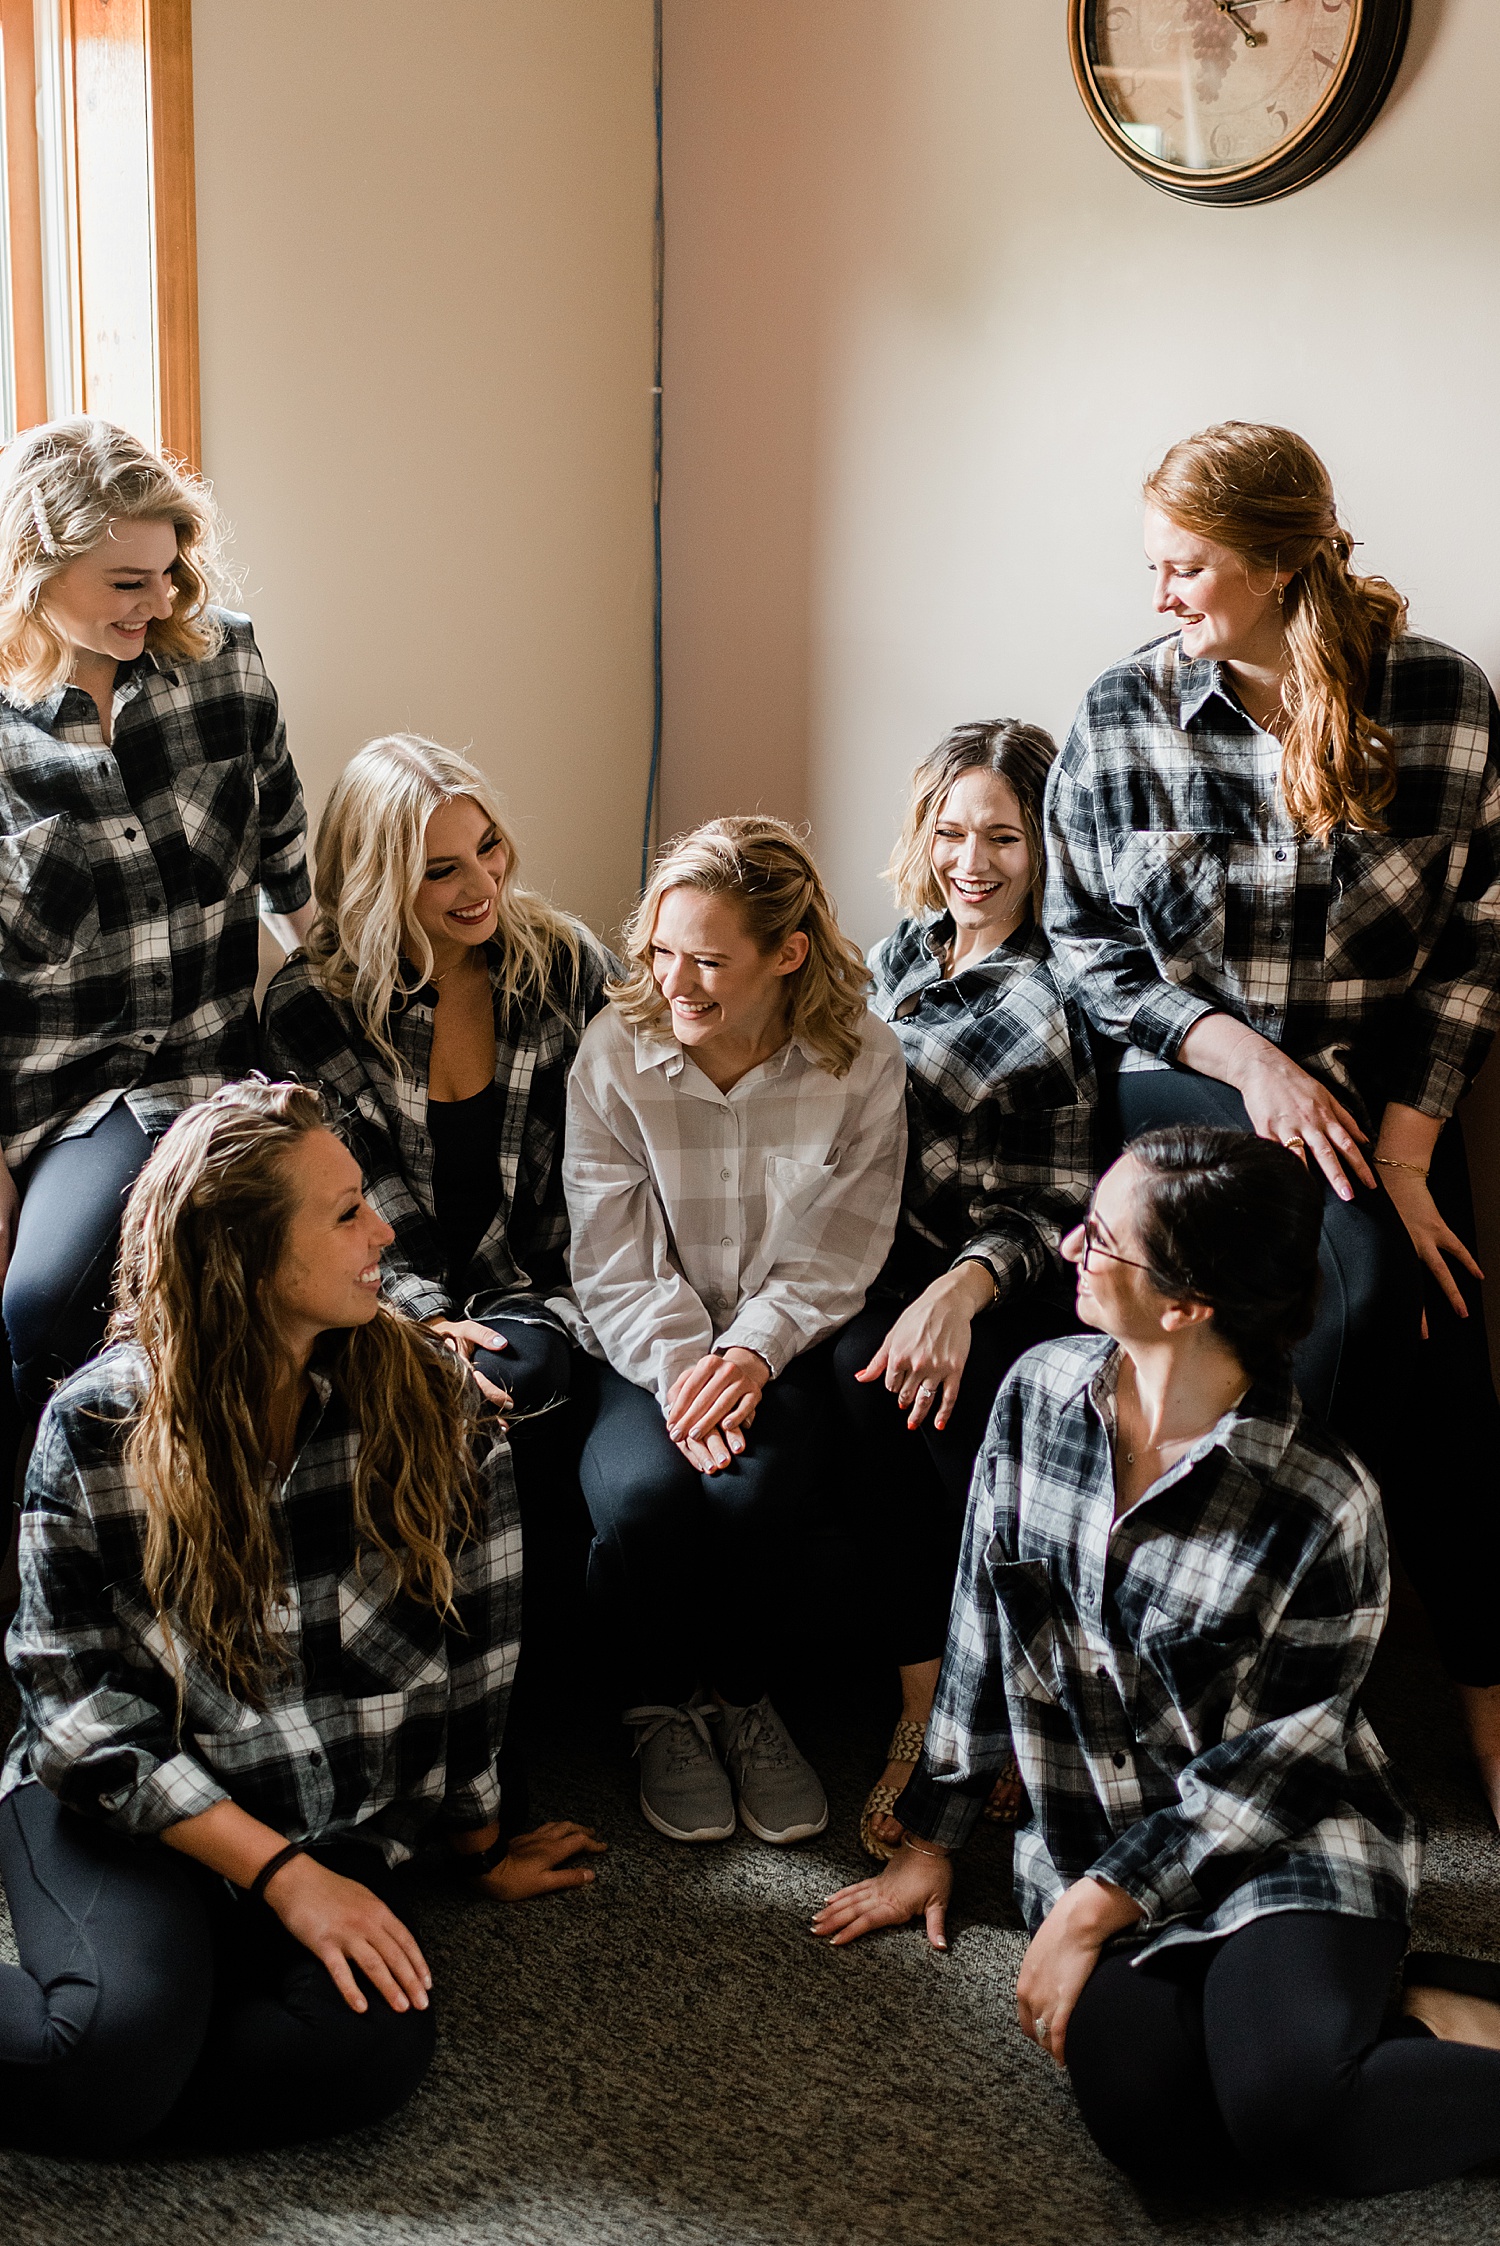 bride and bridesmaids share fun moment before ceremony in getting ready flannels